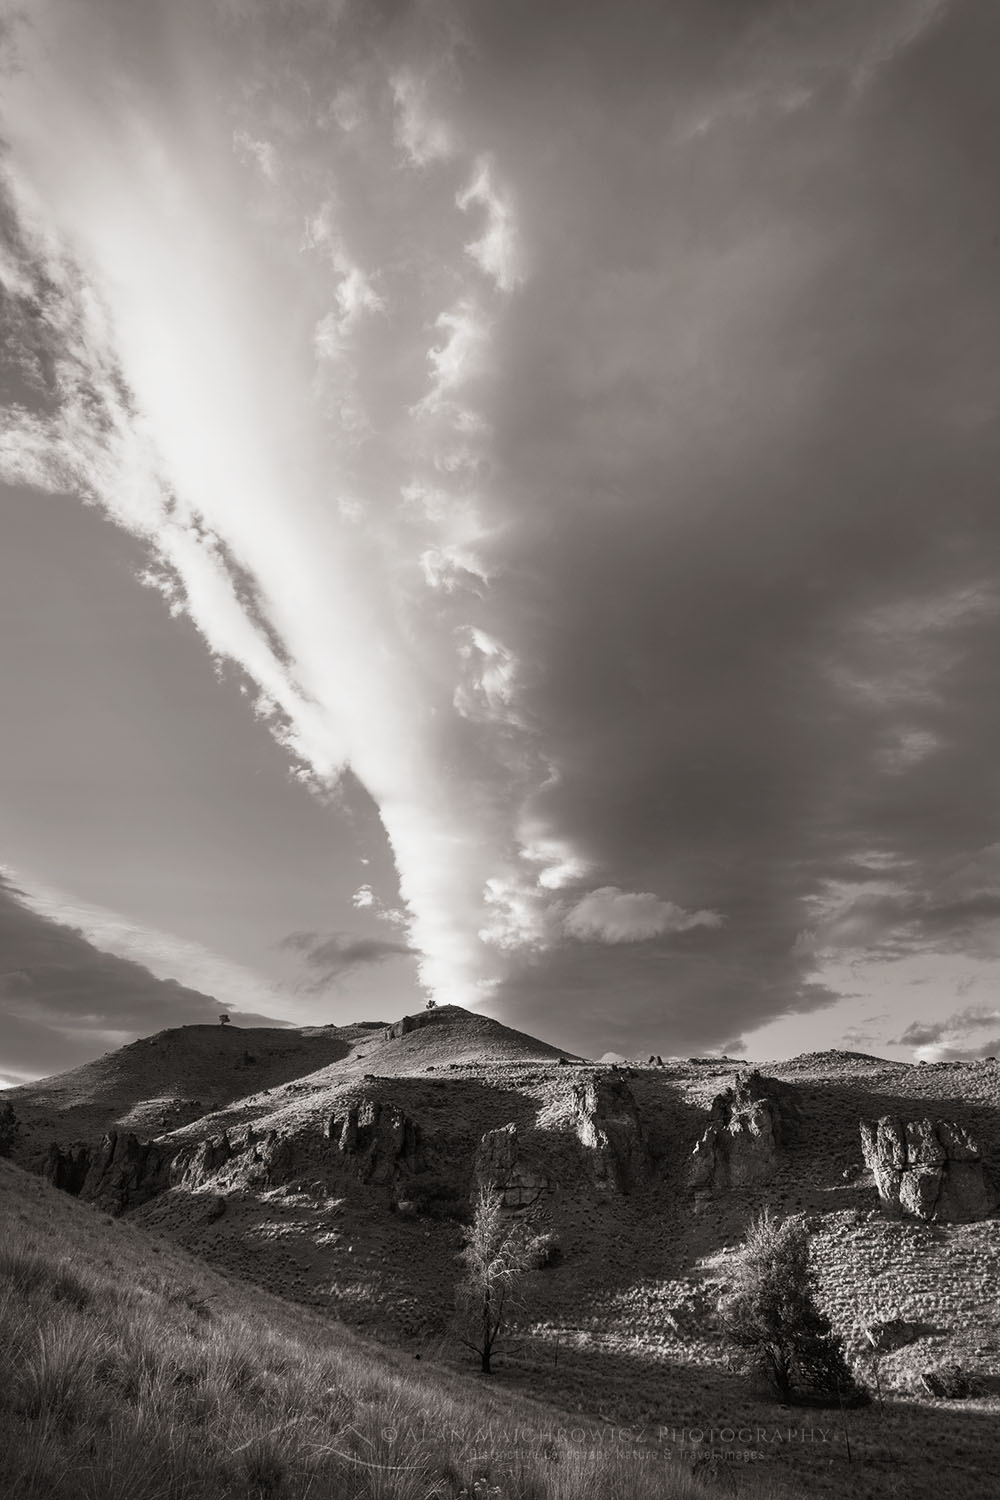 Evening clouds over Clarno Unit of John Day Fossil Beds National Monument Oregon #71303bw